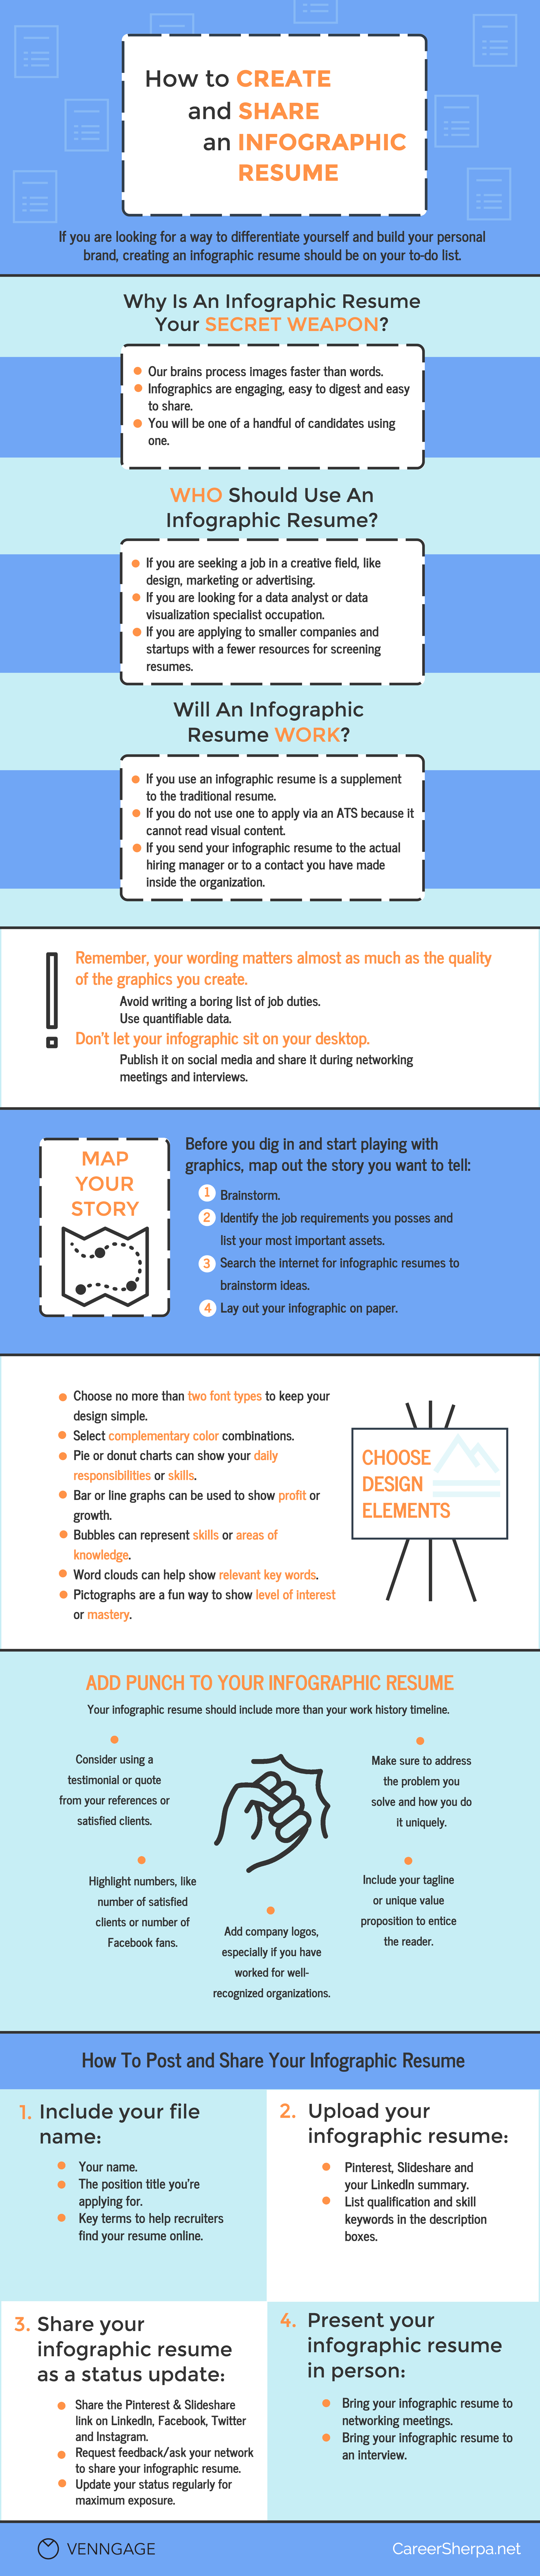 Infographic on how to brainstorm, create, format, share, and present an infographic resume when applying to a job